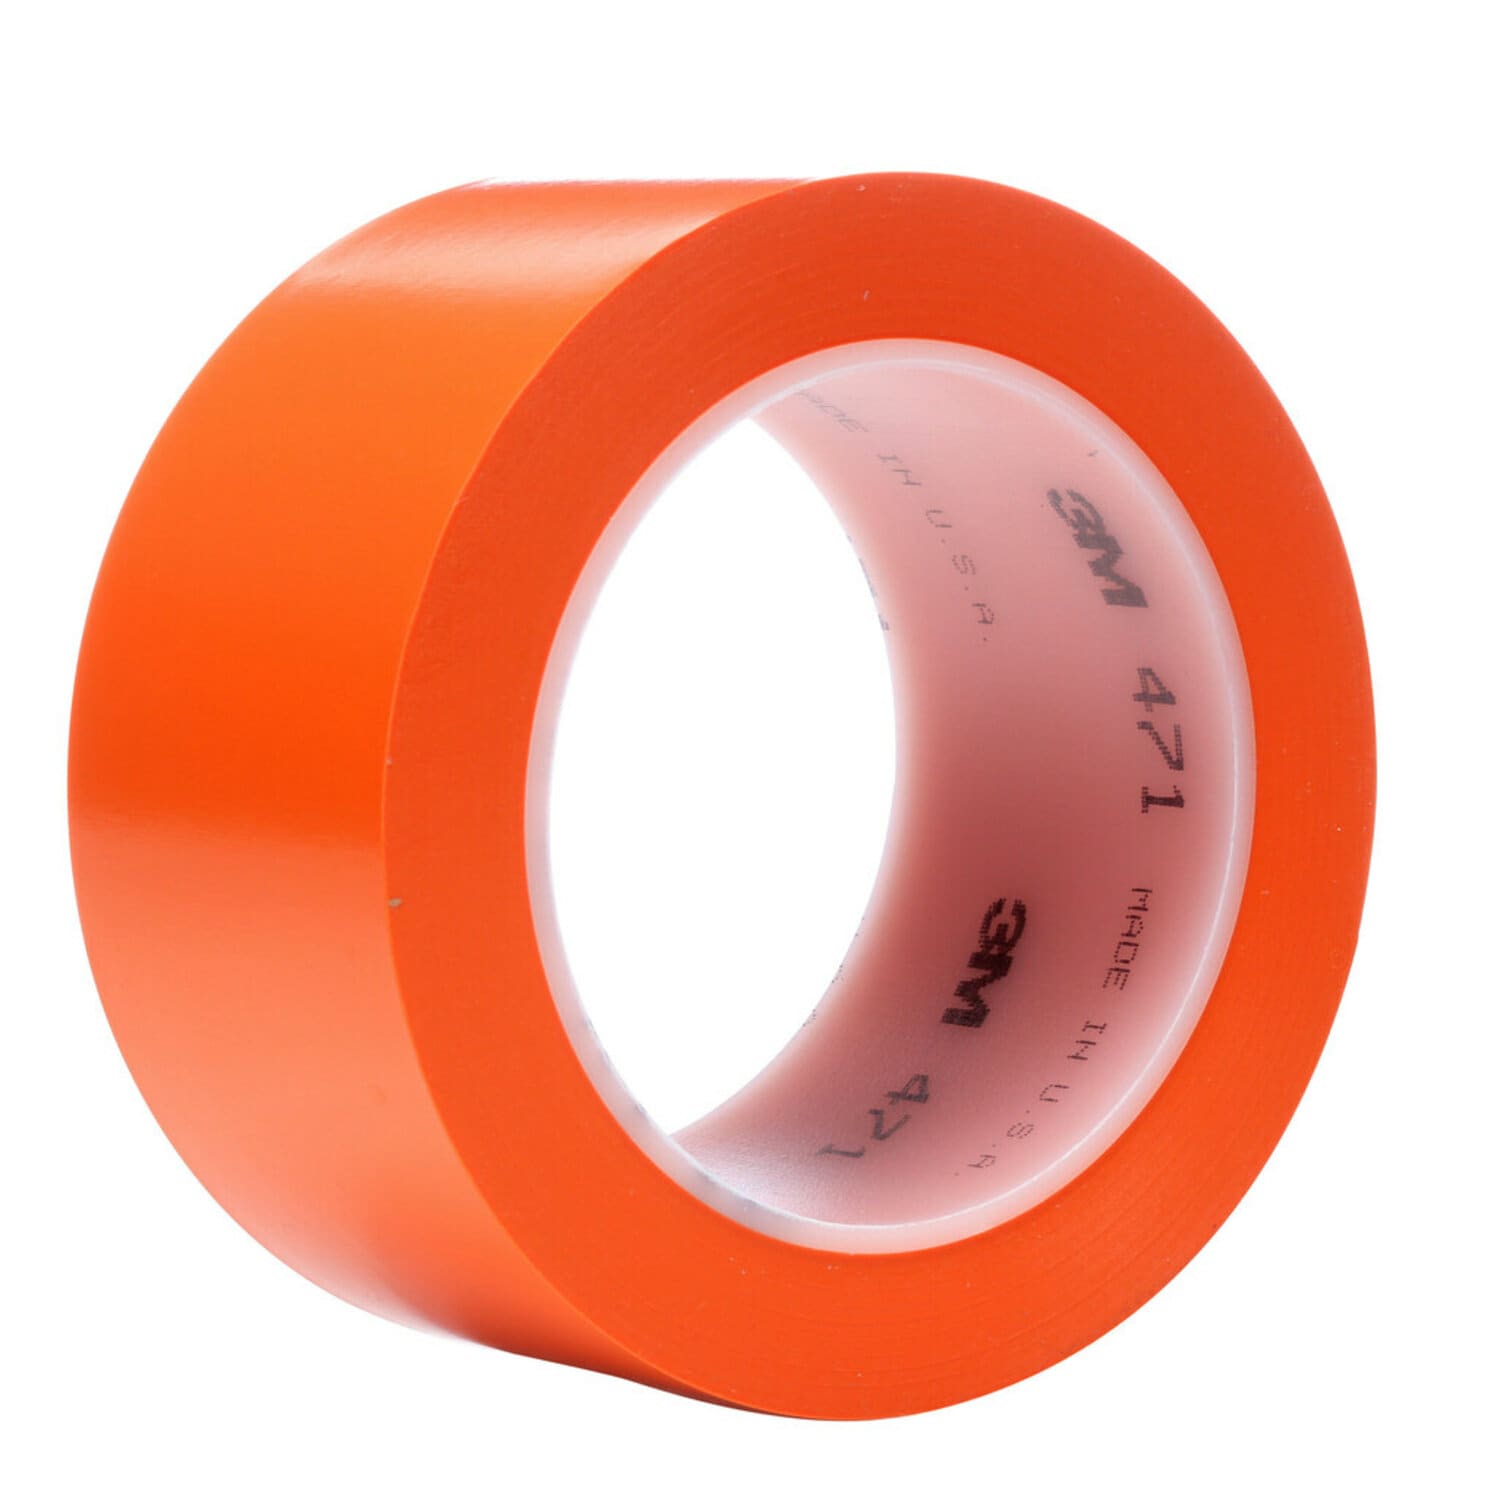 7100061044 - 3M Vinyl Tape 471, Orange, 2 in x 36 yd, 5.2 mil, 24 rolls per case,
Individually Wrapped Conveniently Packaged